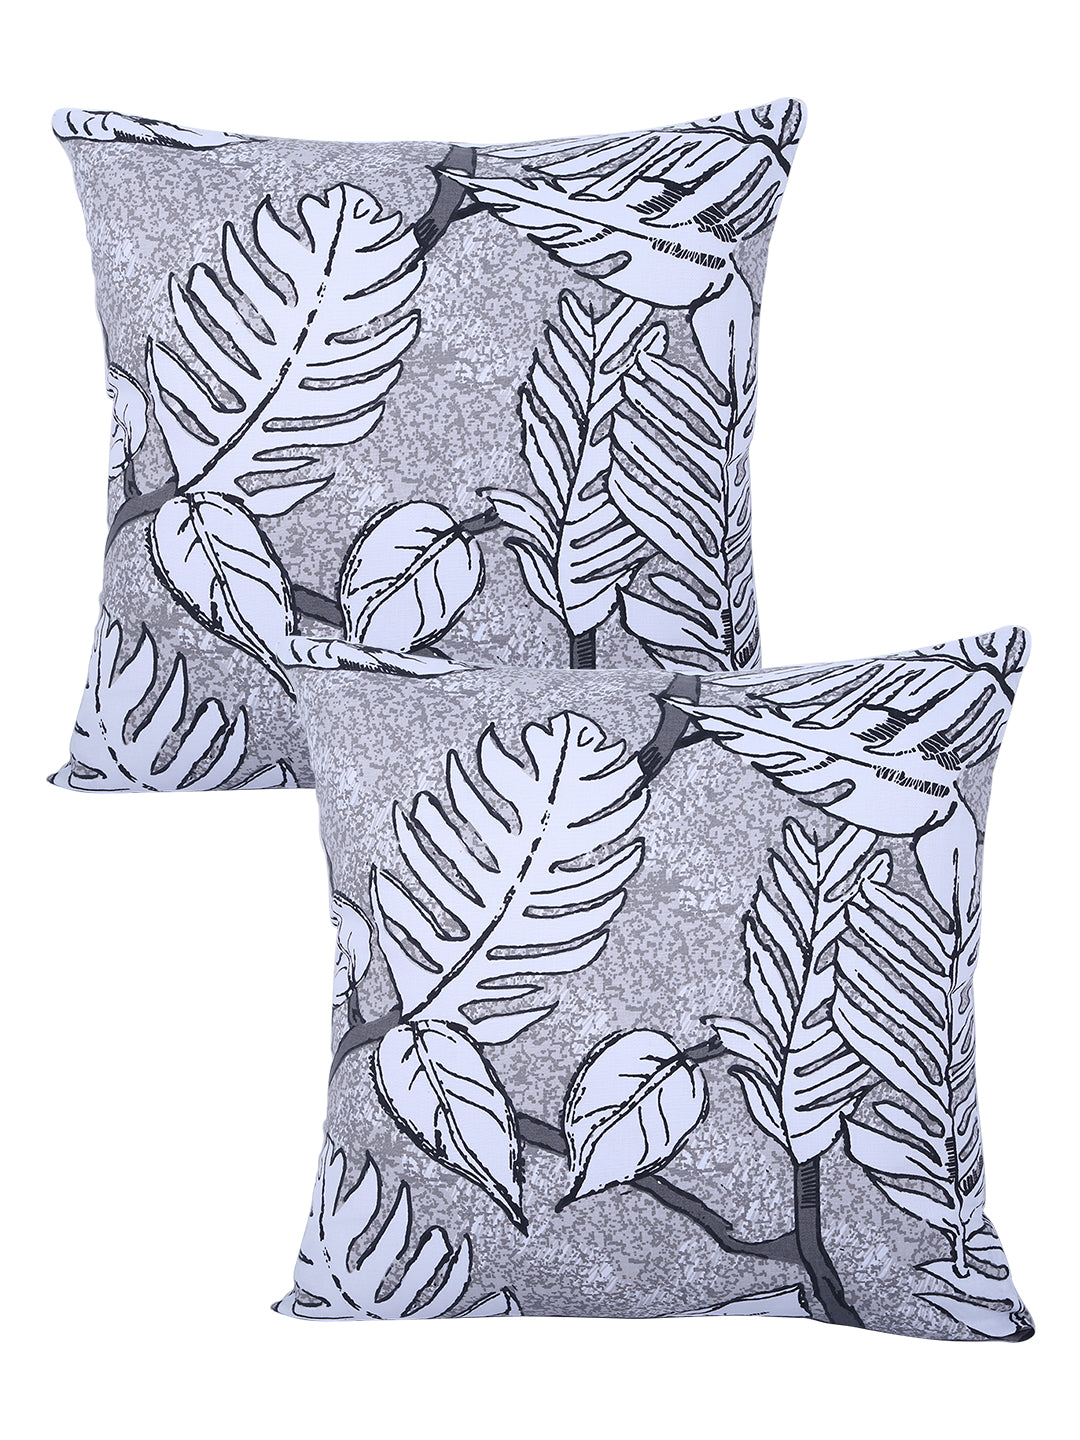 Floral Printed Cotton Diwan Set with Bolster and Cushion Covers - Grey